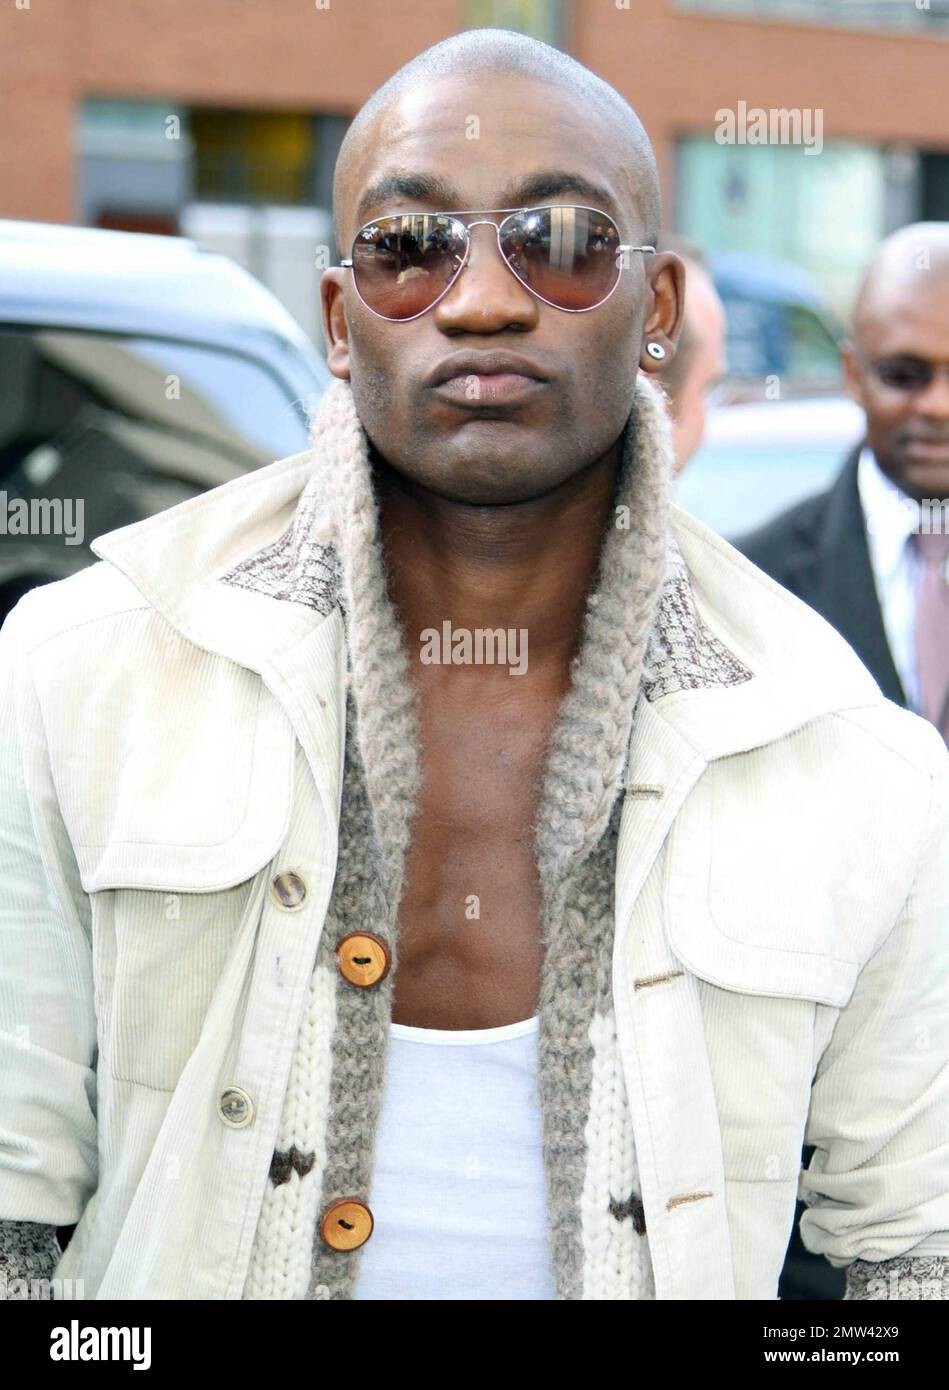 Kalvin Lamey of FYD, an 'X Factor' finalist band, leaves ITV studios after appearing on the morning talk show GMTV alongside other 'X Factor' contestants. London, UK. 10/07/10.    . Stock Photo